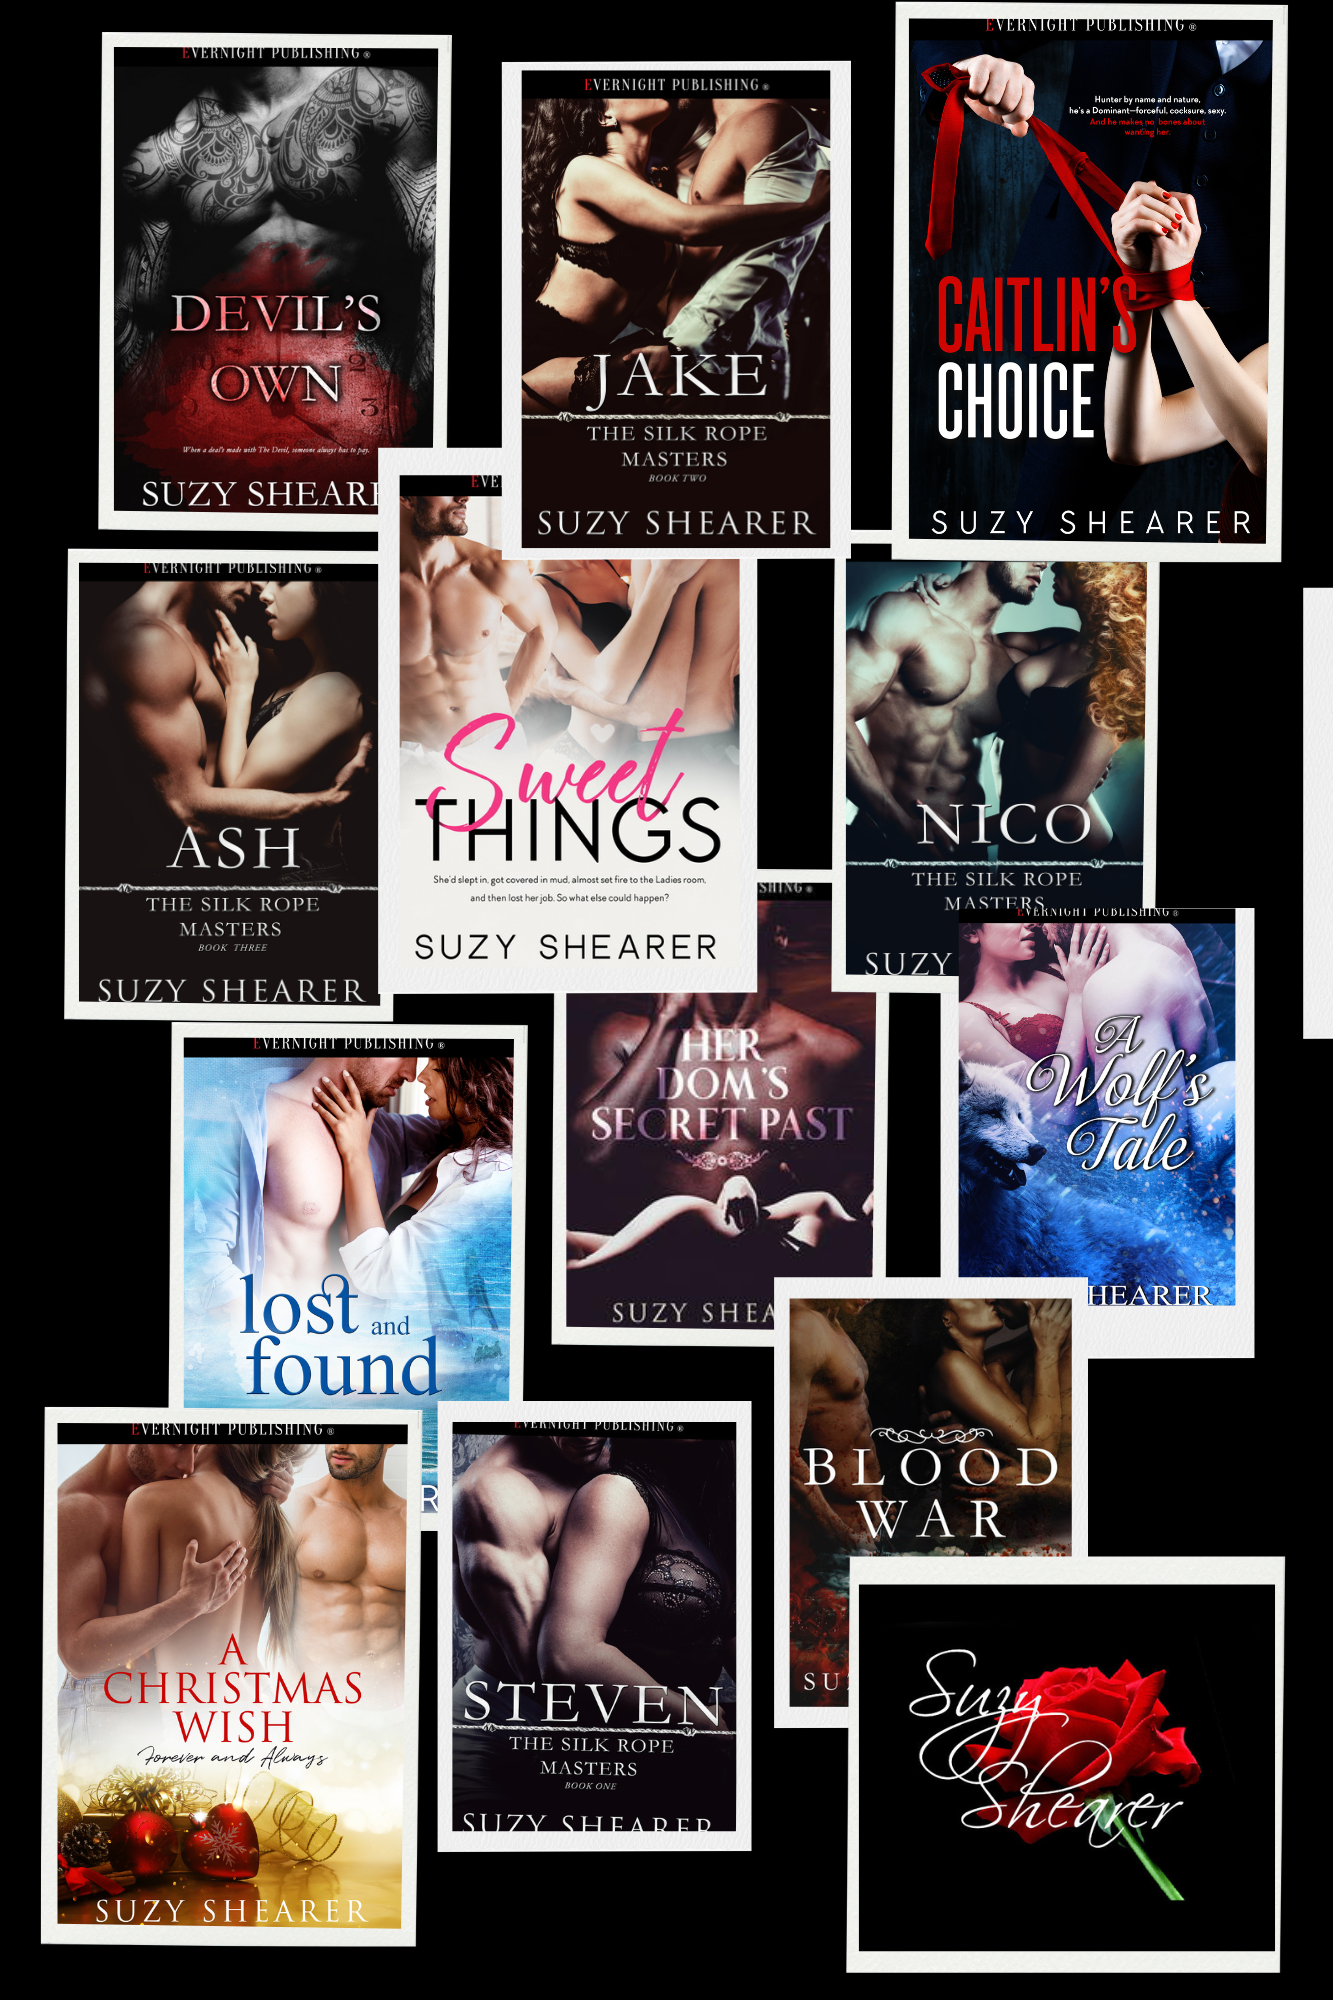 Covers of 12 books all by the same author -  Suzy Shearer
All books are erotic romances - 9 are contemporary and 3 are paranormal.